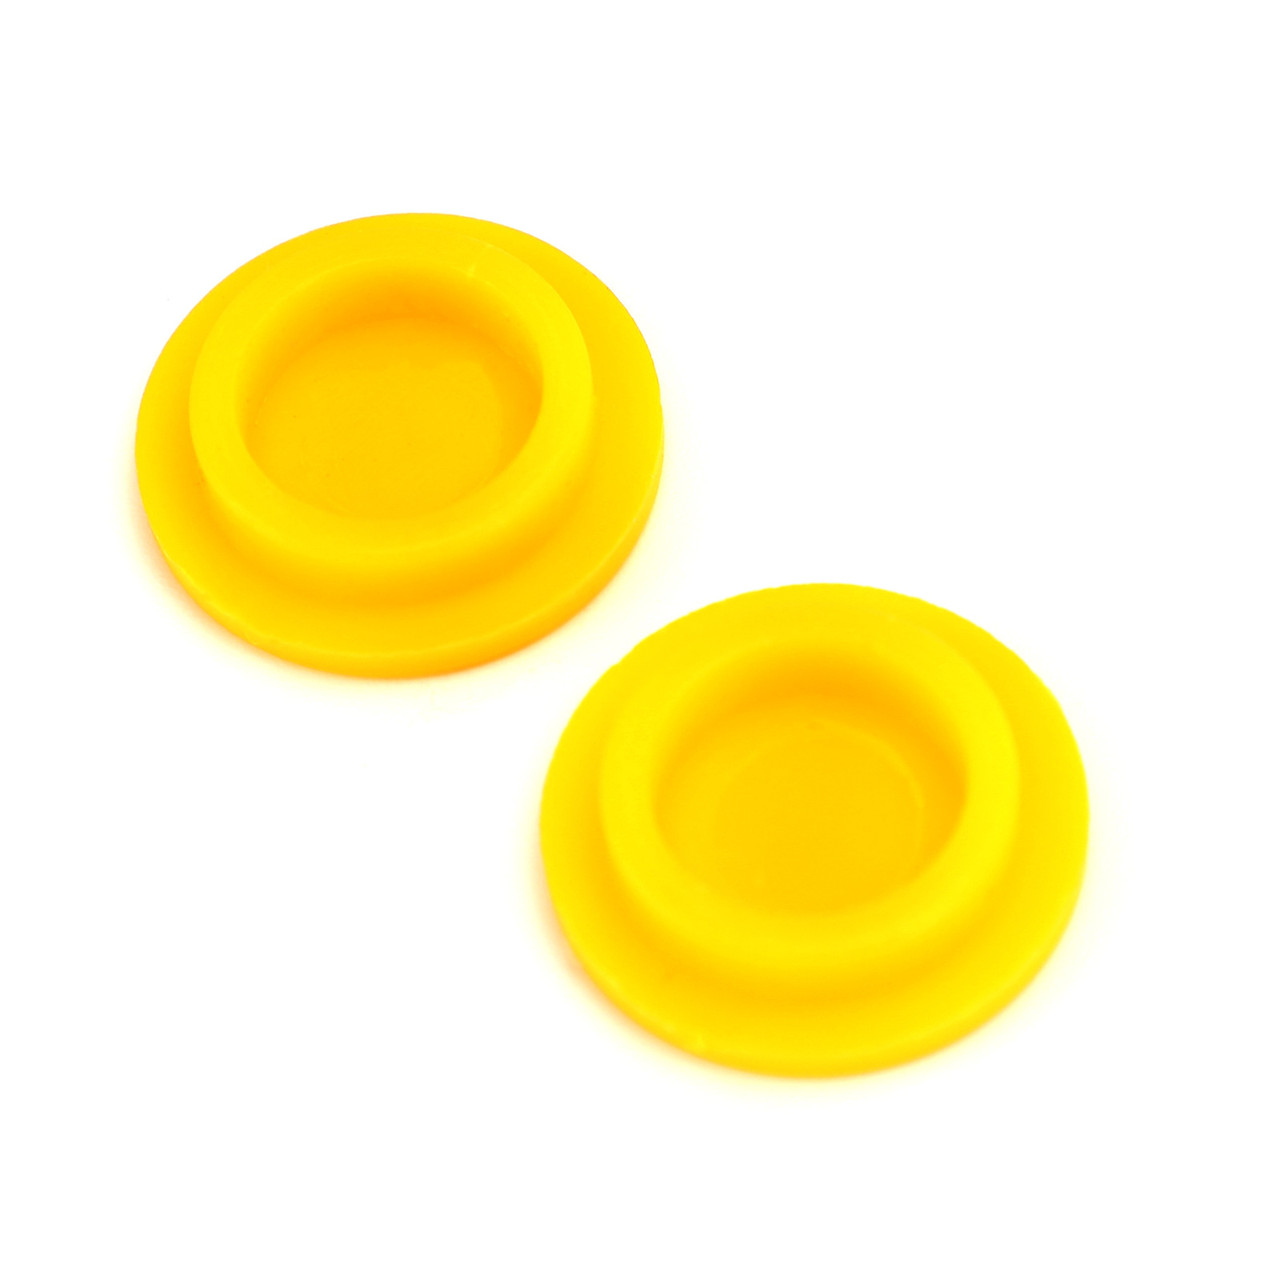 Grease Caps for John Deere 1023E 1025R 2025R Compact Tractor 120 Loader Yellow,Yellow Grease Caps For John Deere 1023E 1025R 2025R Compact Tractor 120 Loader,Compact Tractor 120 Loader Fitting Grease Caps For John Deere 1023E 1025R 1025R